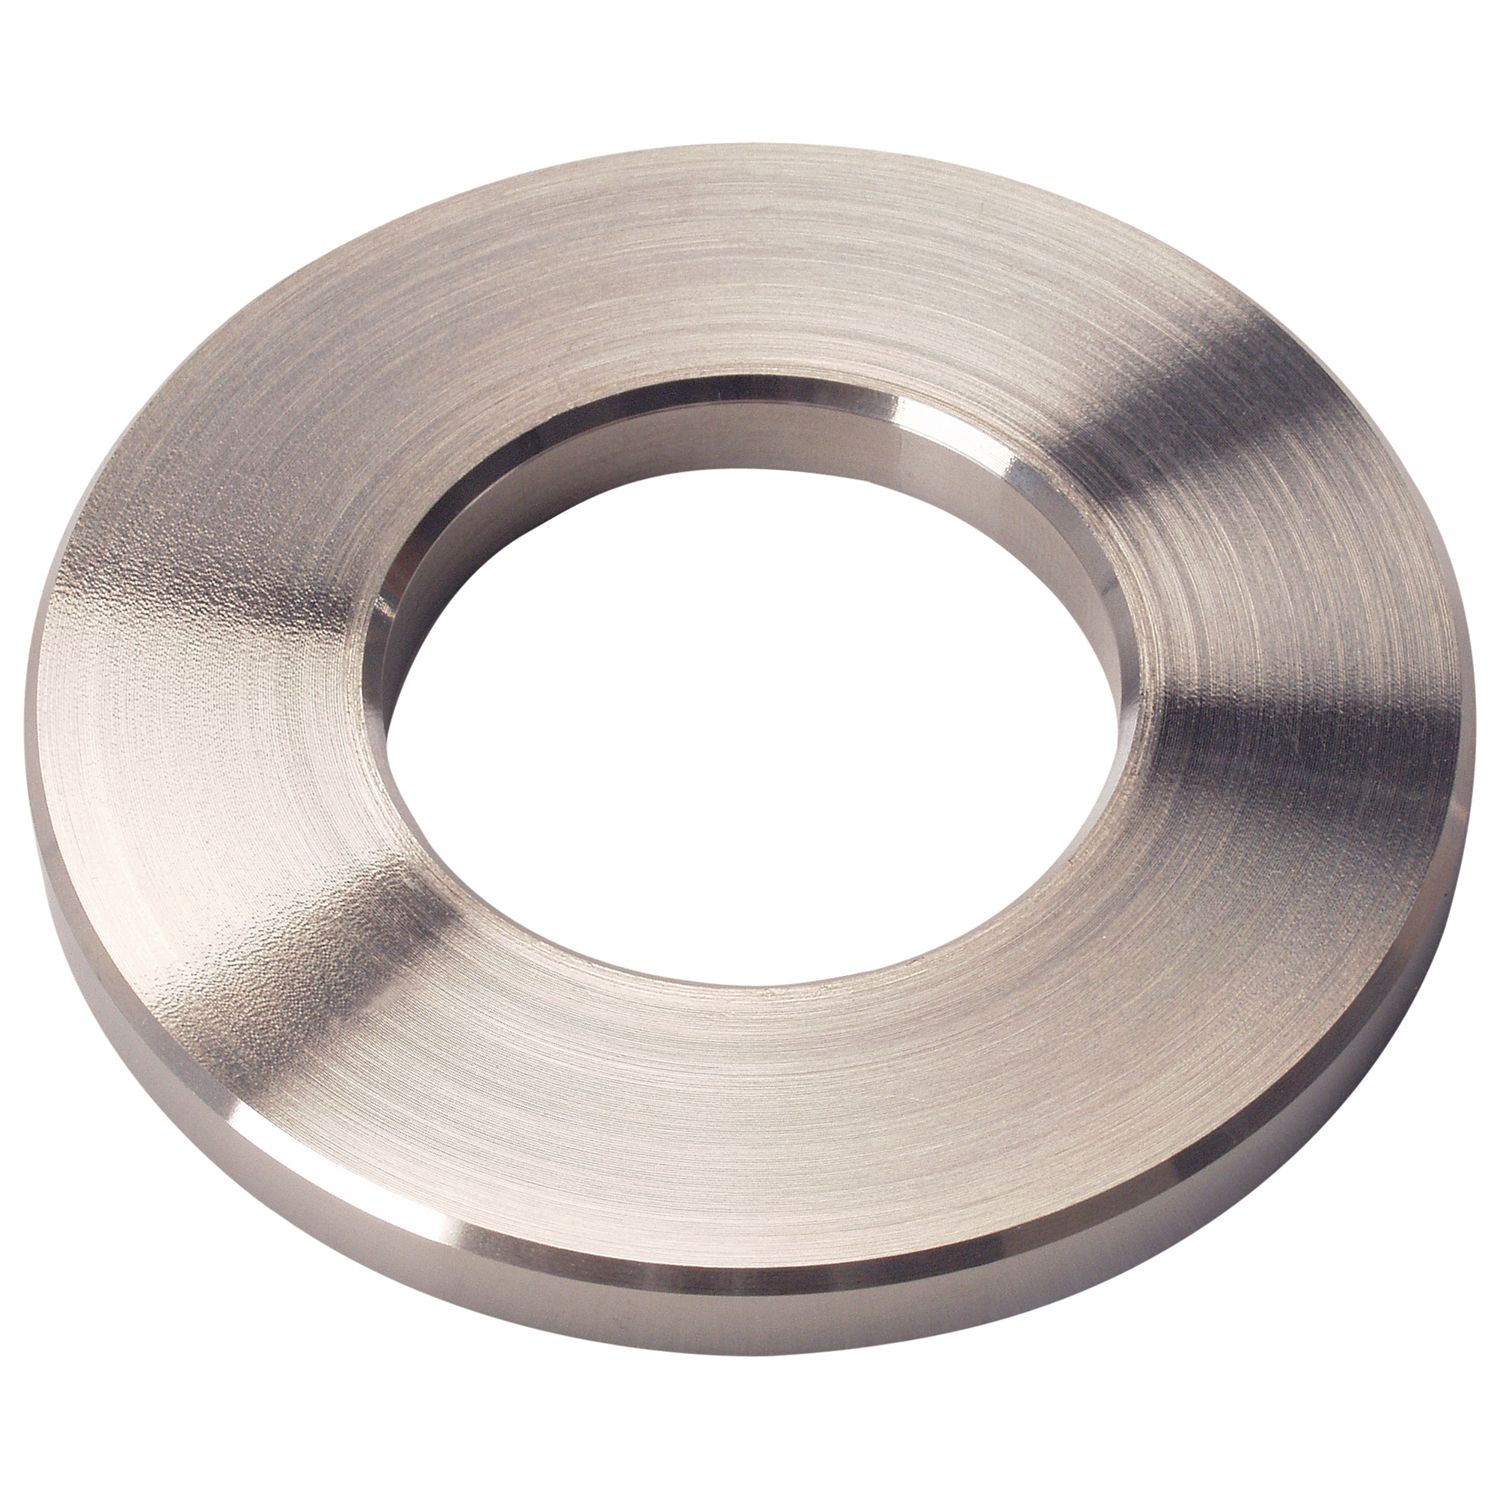 Barlow Tyrie Stainless steel Parasol Reducer Ring, 38mm